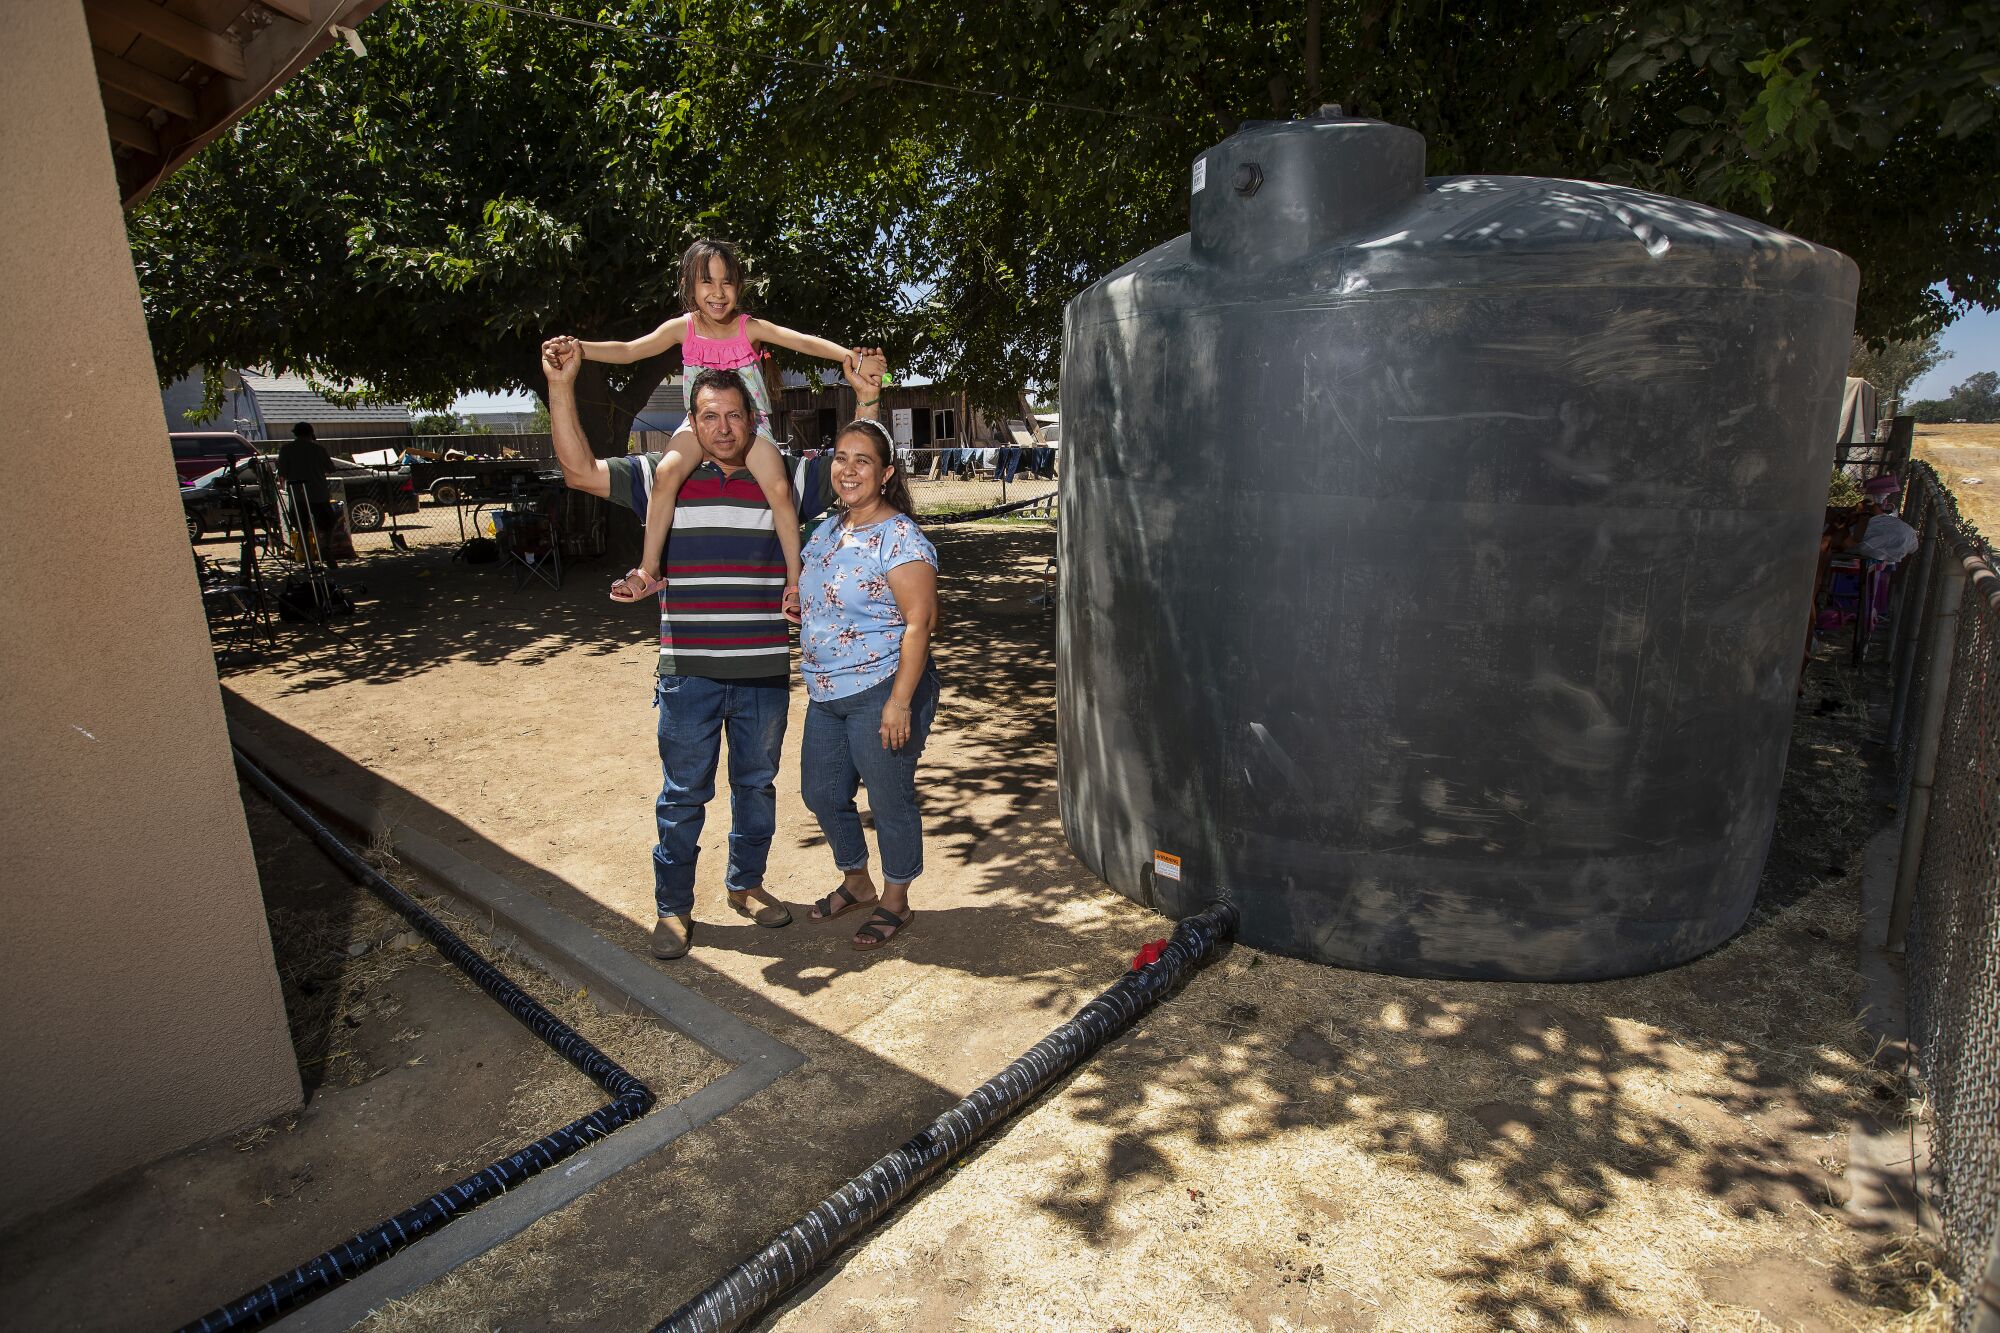 A girl sits on her father's shoulders and poses with him and her mother next to a large water tank